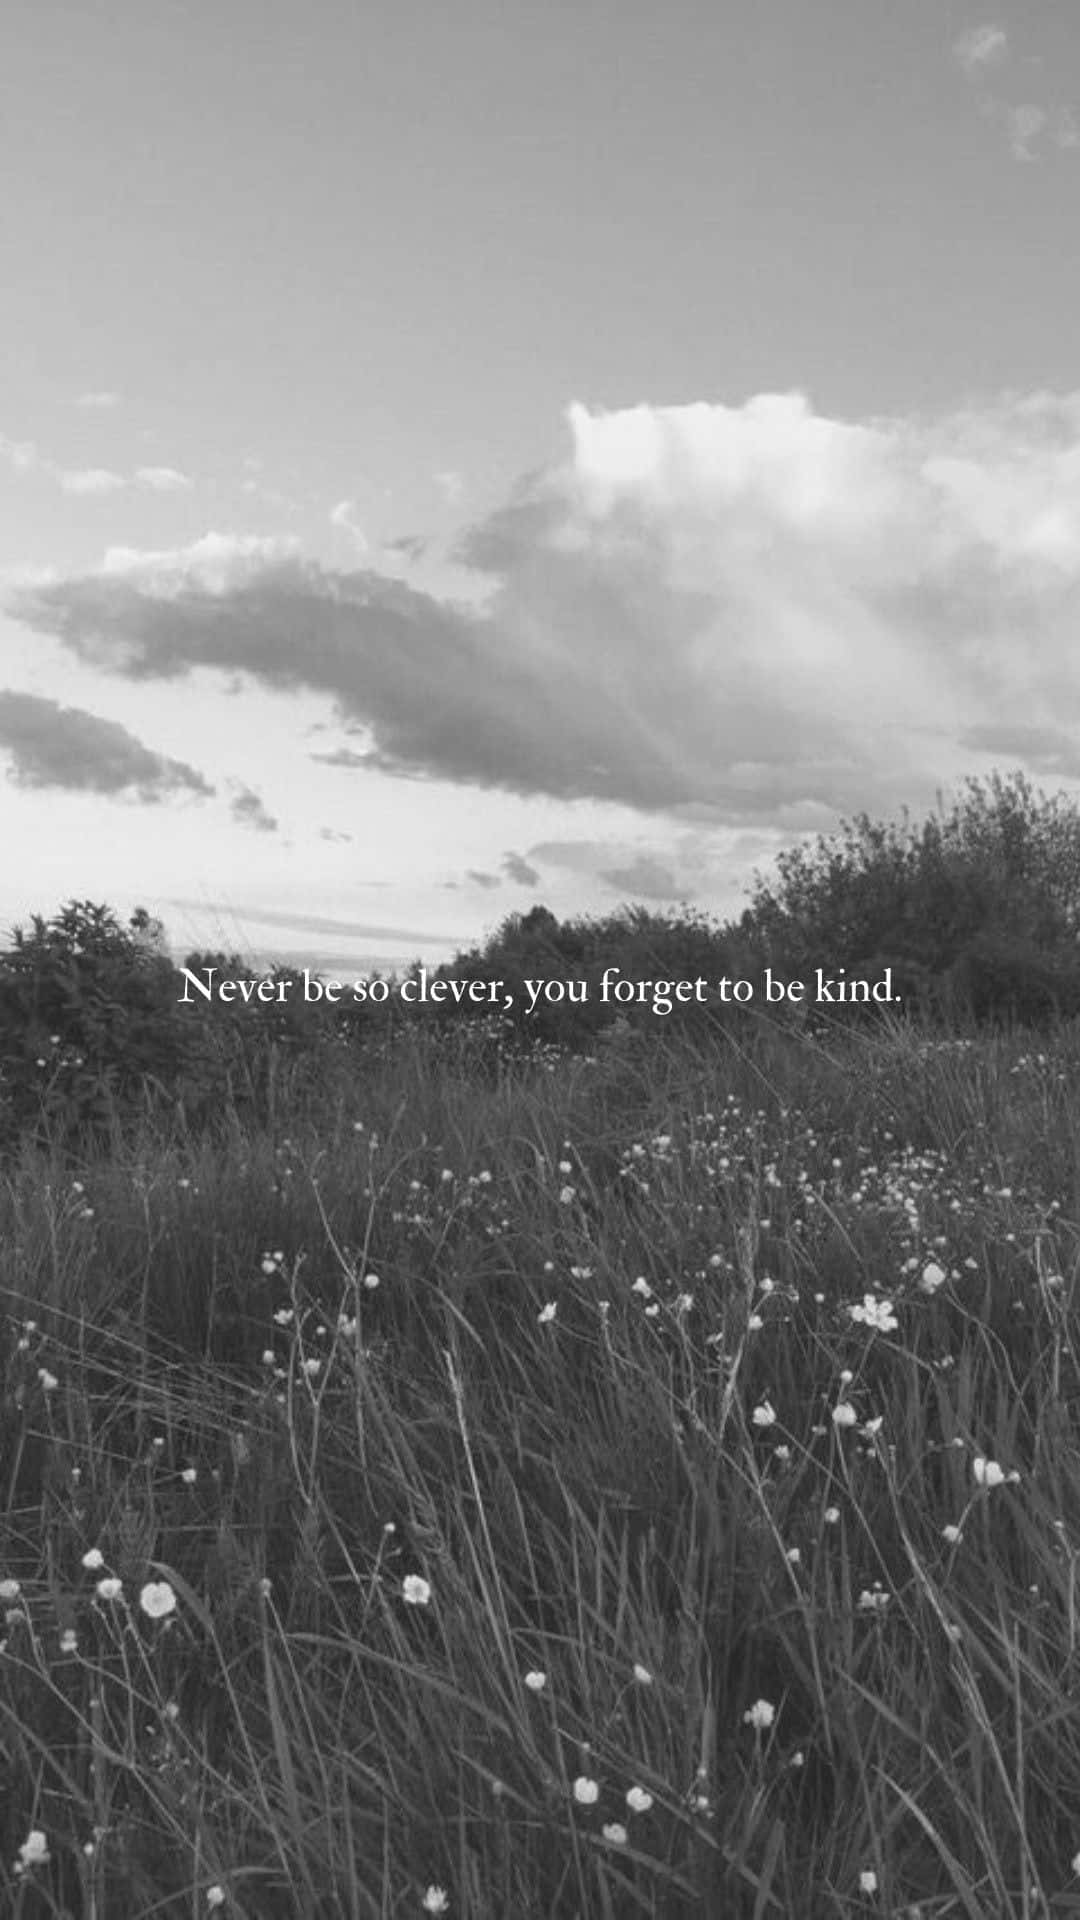 Clevernessand Kindness Quote Field Wallpaper